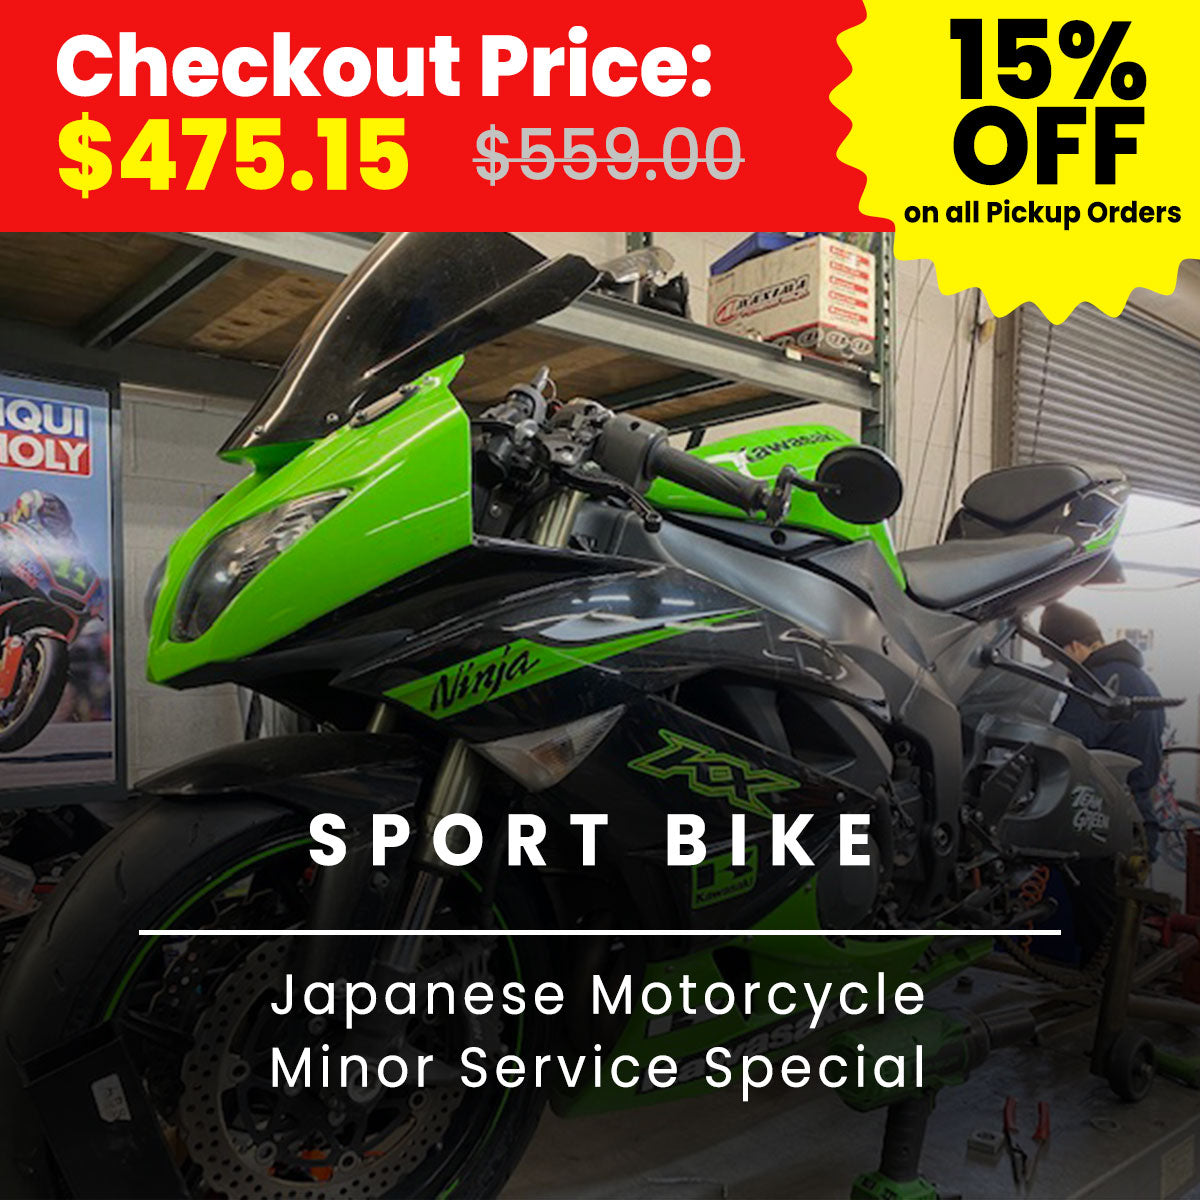 Japanese Motorcycle Minor Service Special (at Location: Fullerton CA)